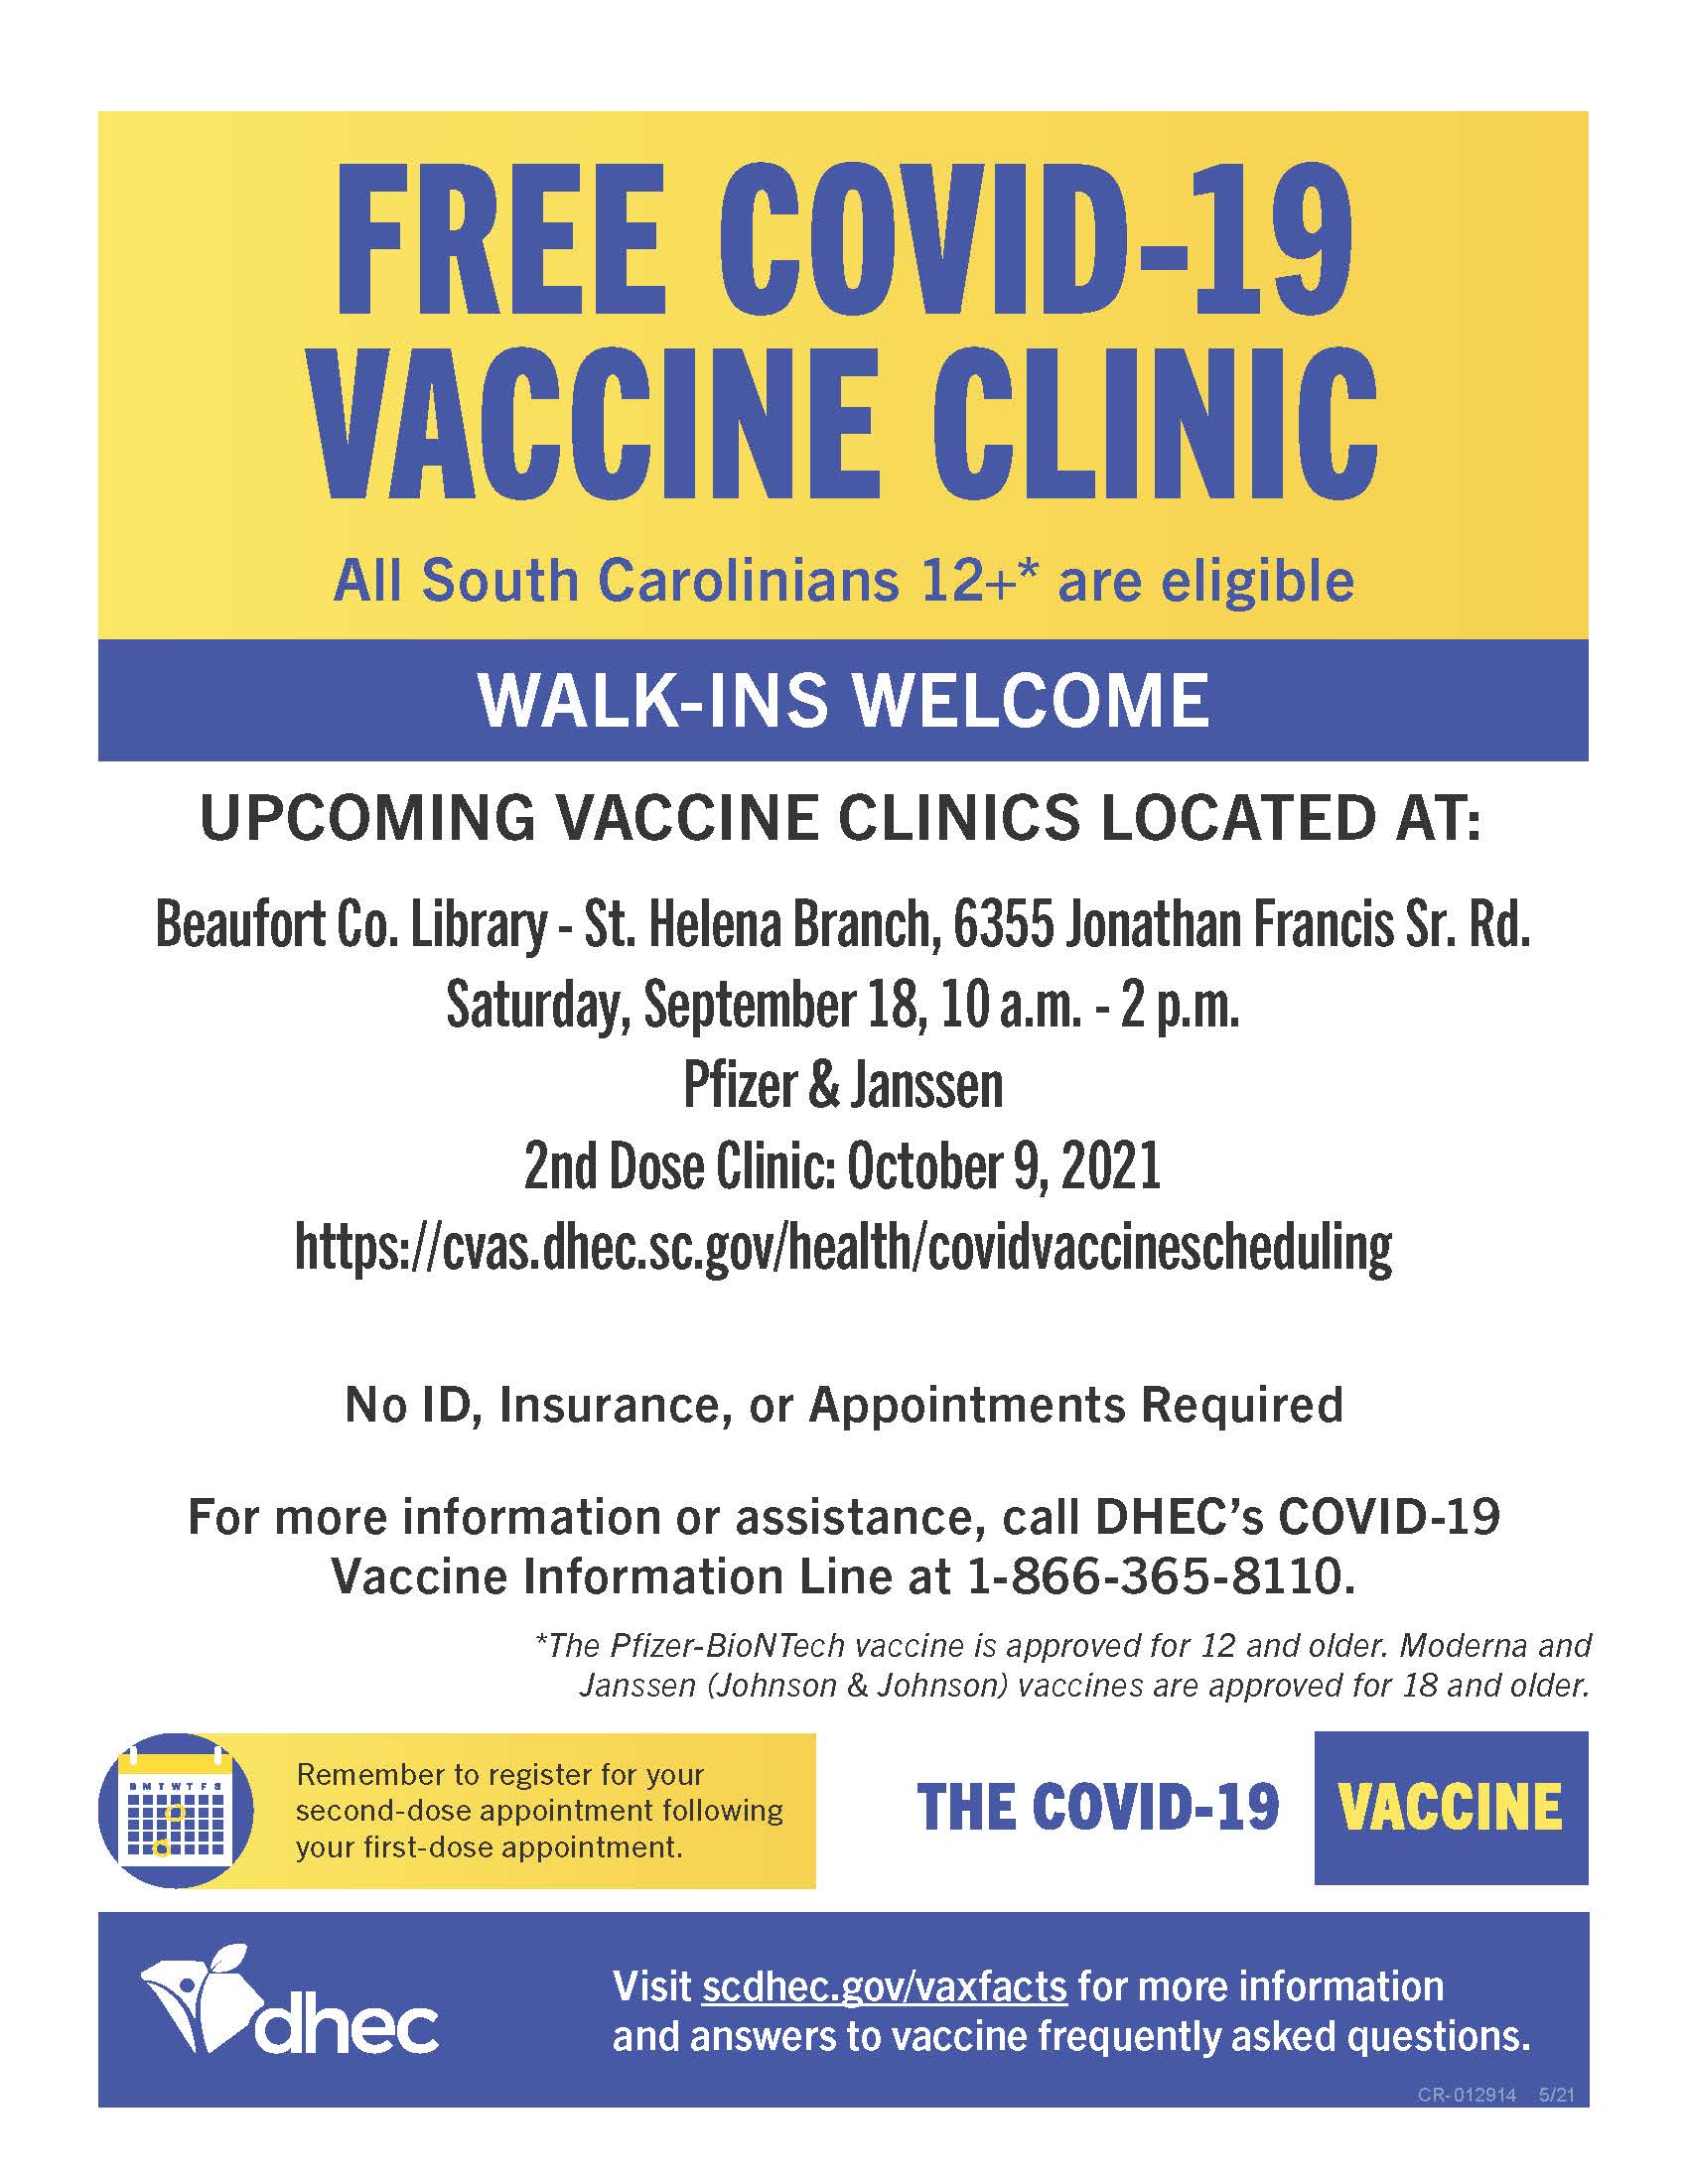 Free Covid-19 Vaccine Clinic  Saturday, September 18 at  St. Helena Branch Library